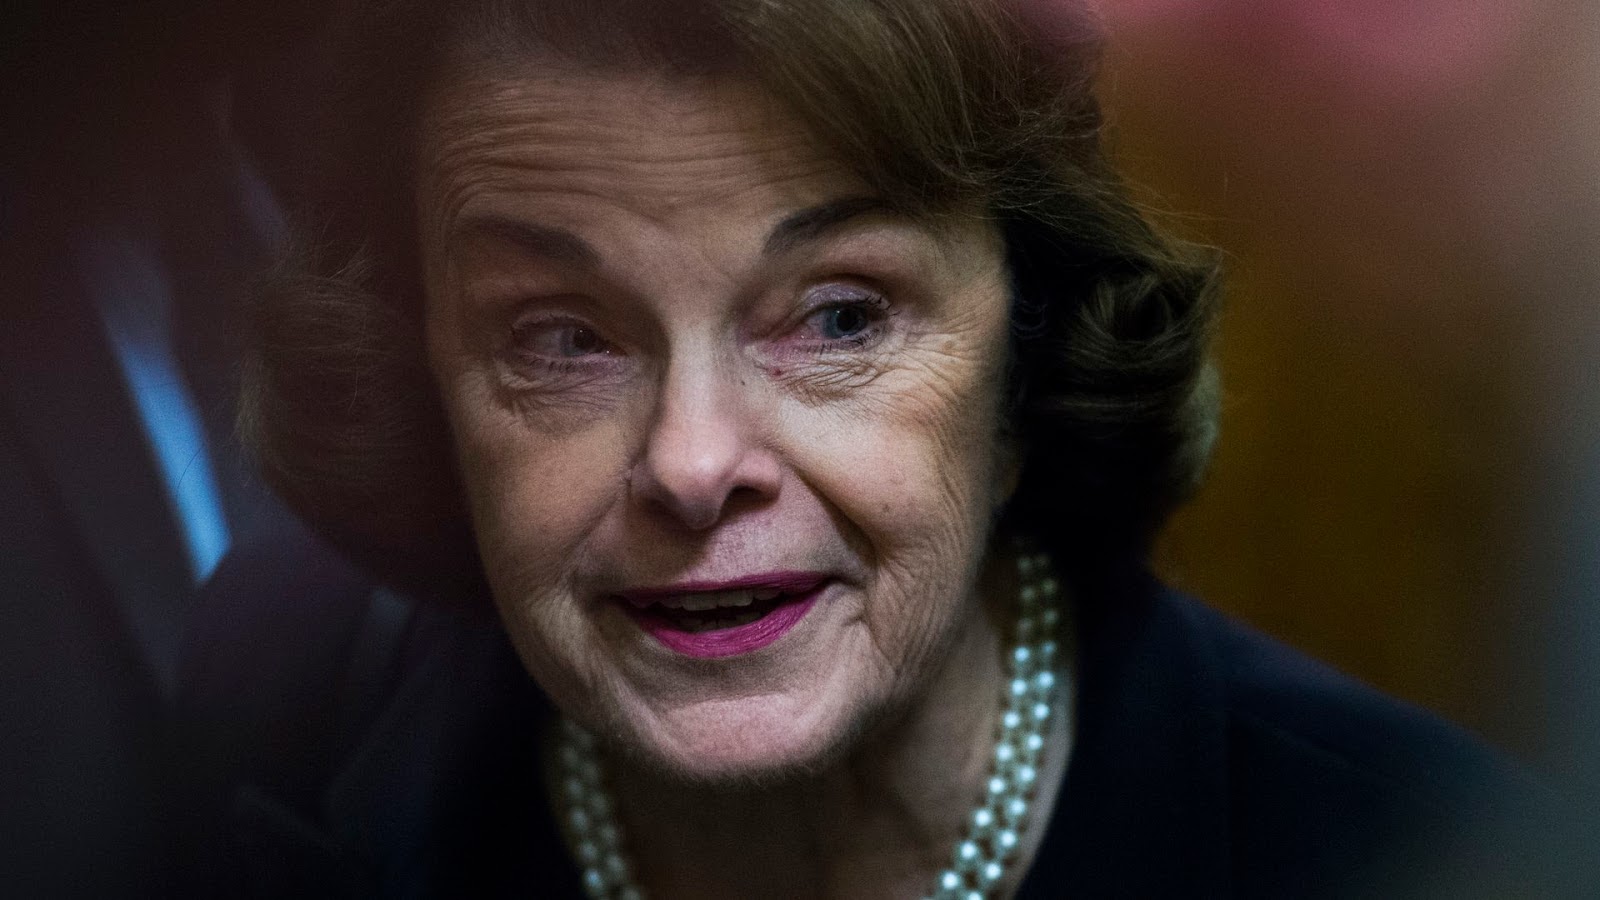 FEINSTEIN, PILGRIMS SOCIETY STOLE SOFTWARE TO INTERFERE IN U.S. ELECTIONS